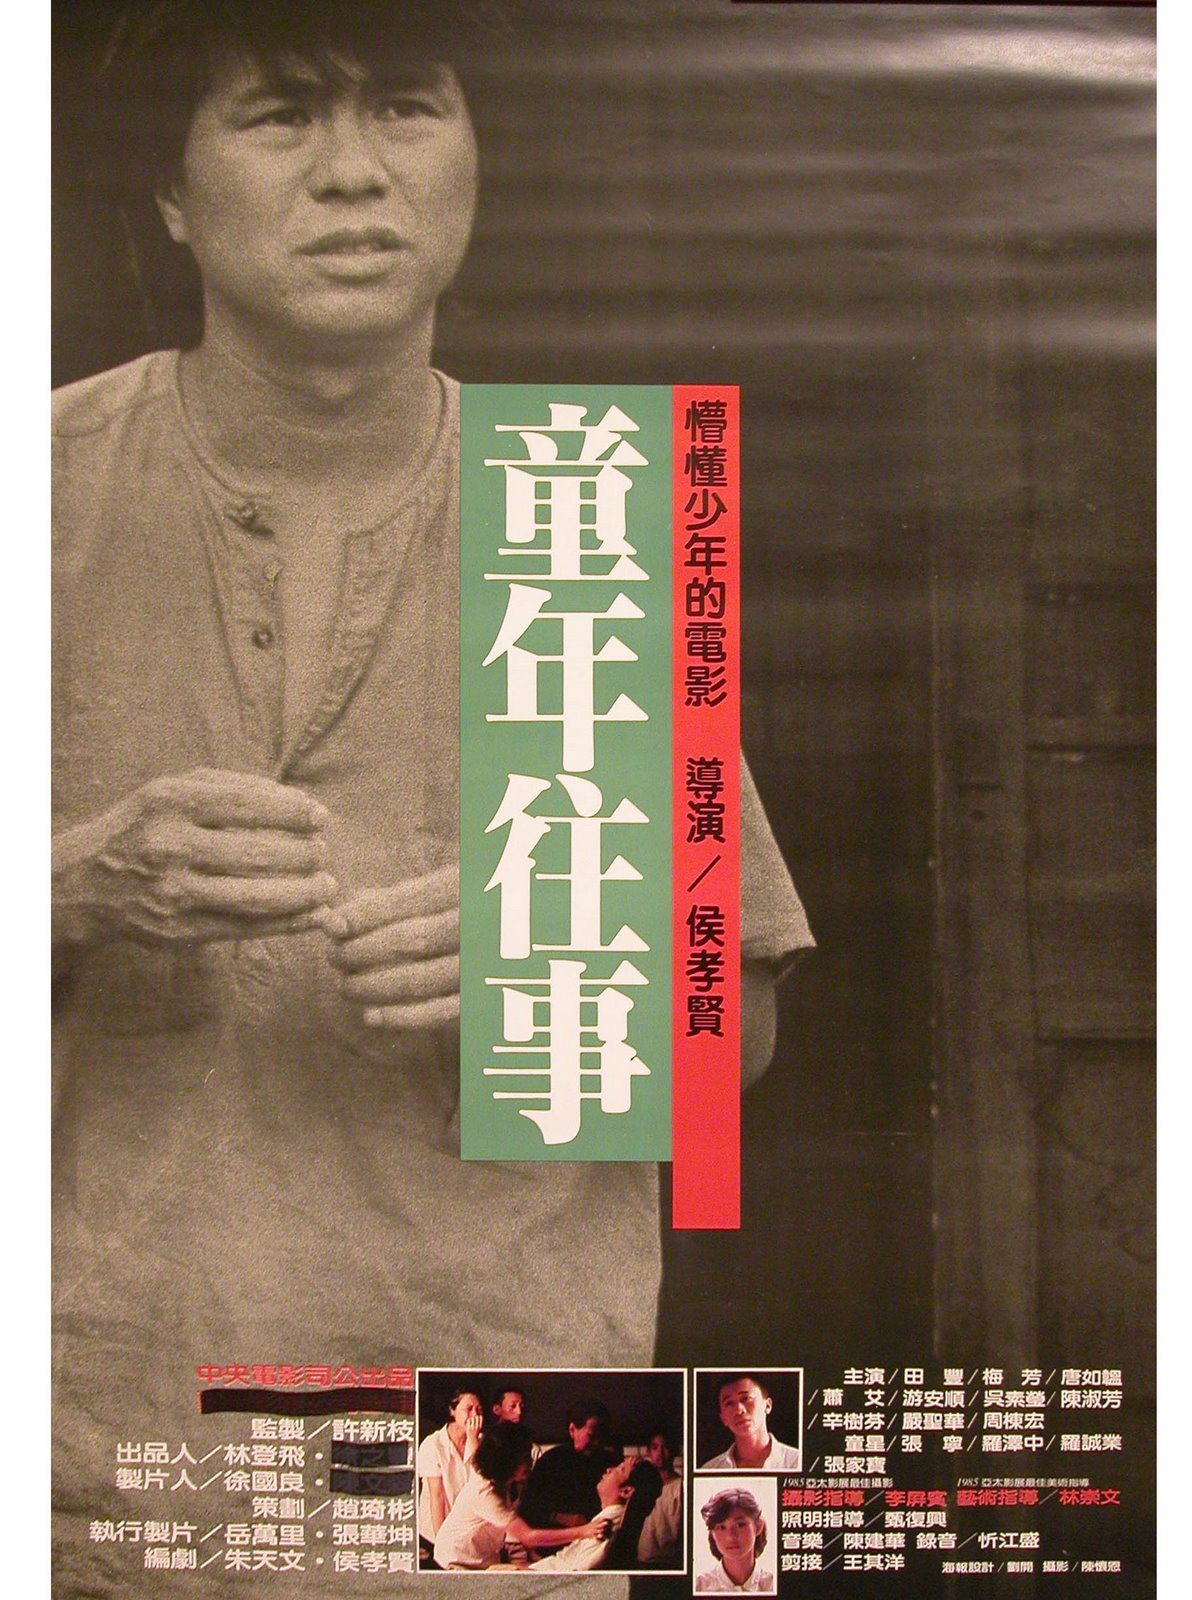 Taiwanese poster of Hou Hsiao-Hsien’s film The Time to Live and the Time to Die (1985).
Designer: Liu Kai (劉開)